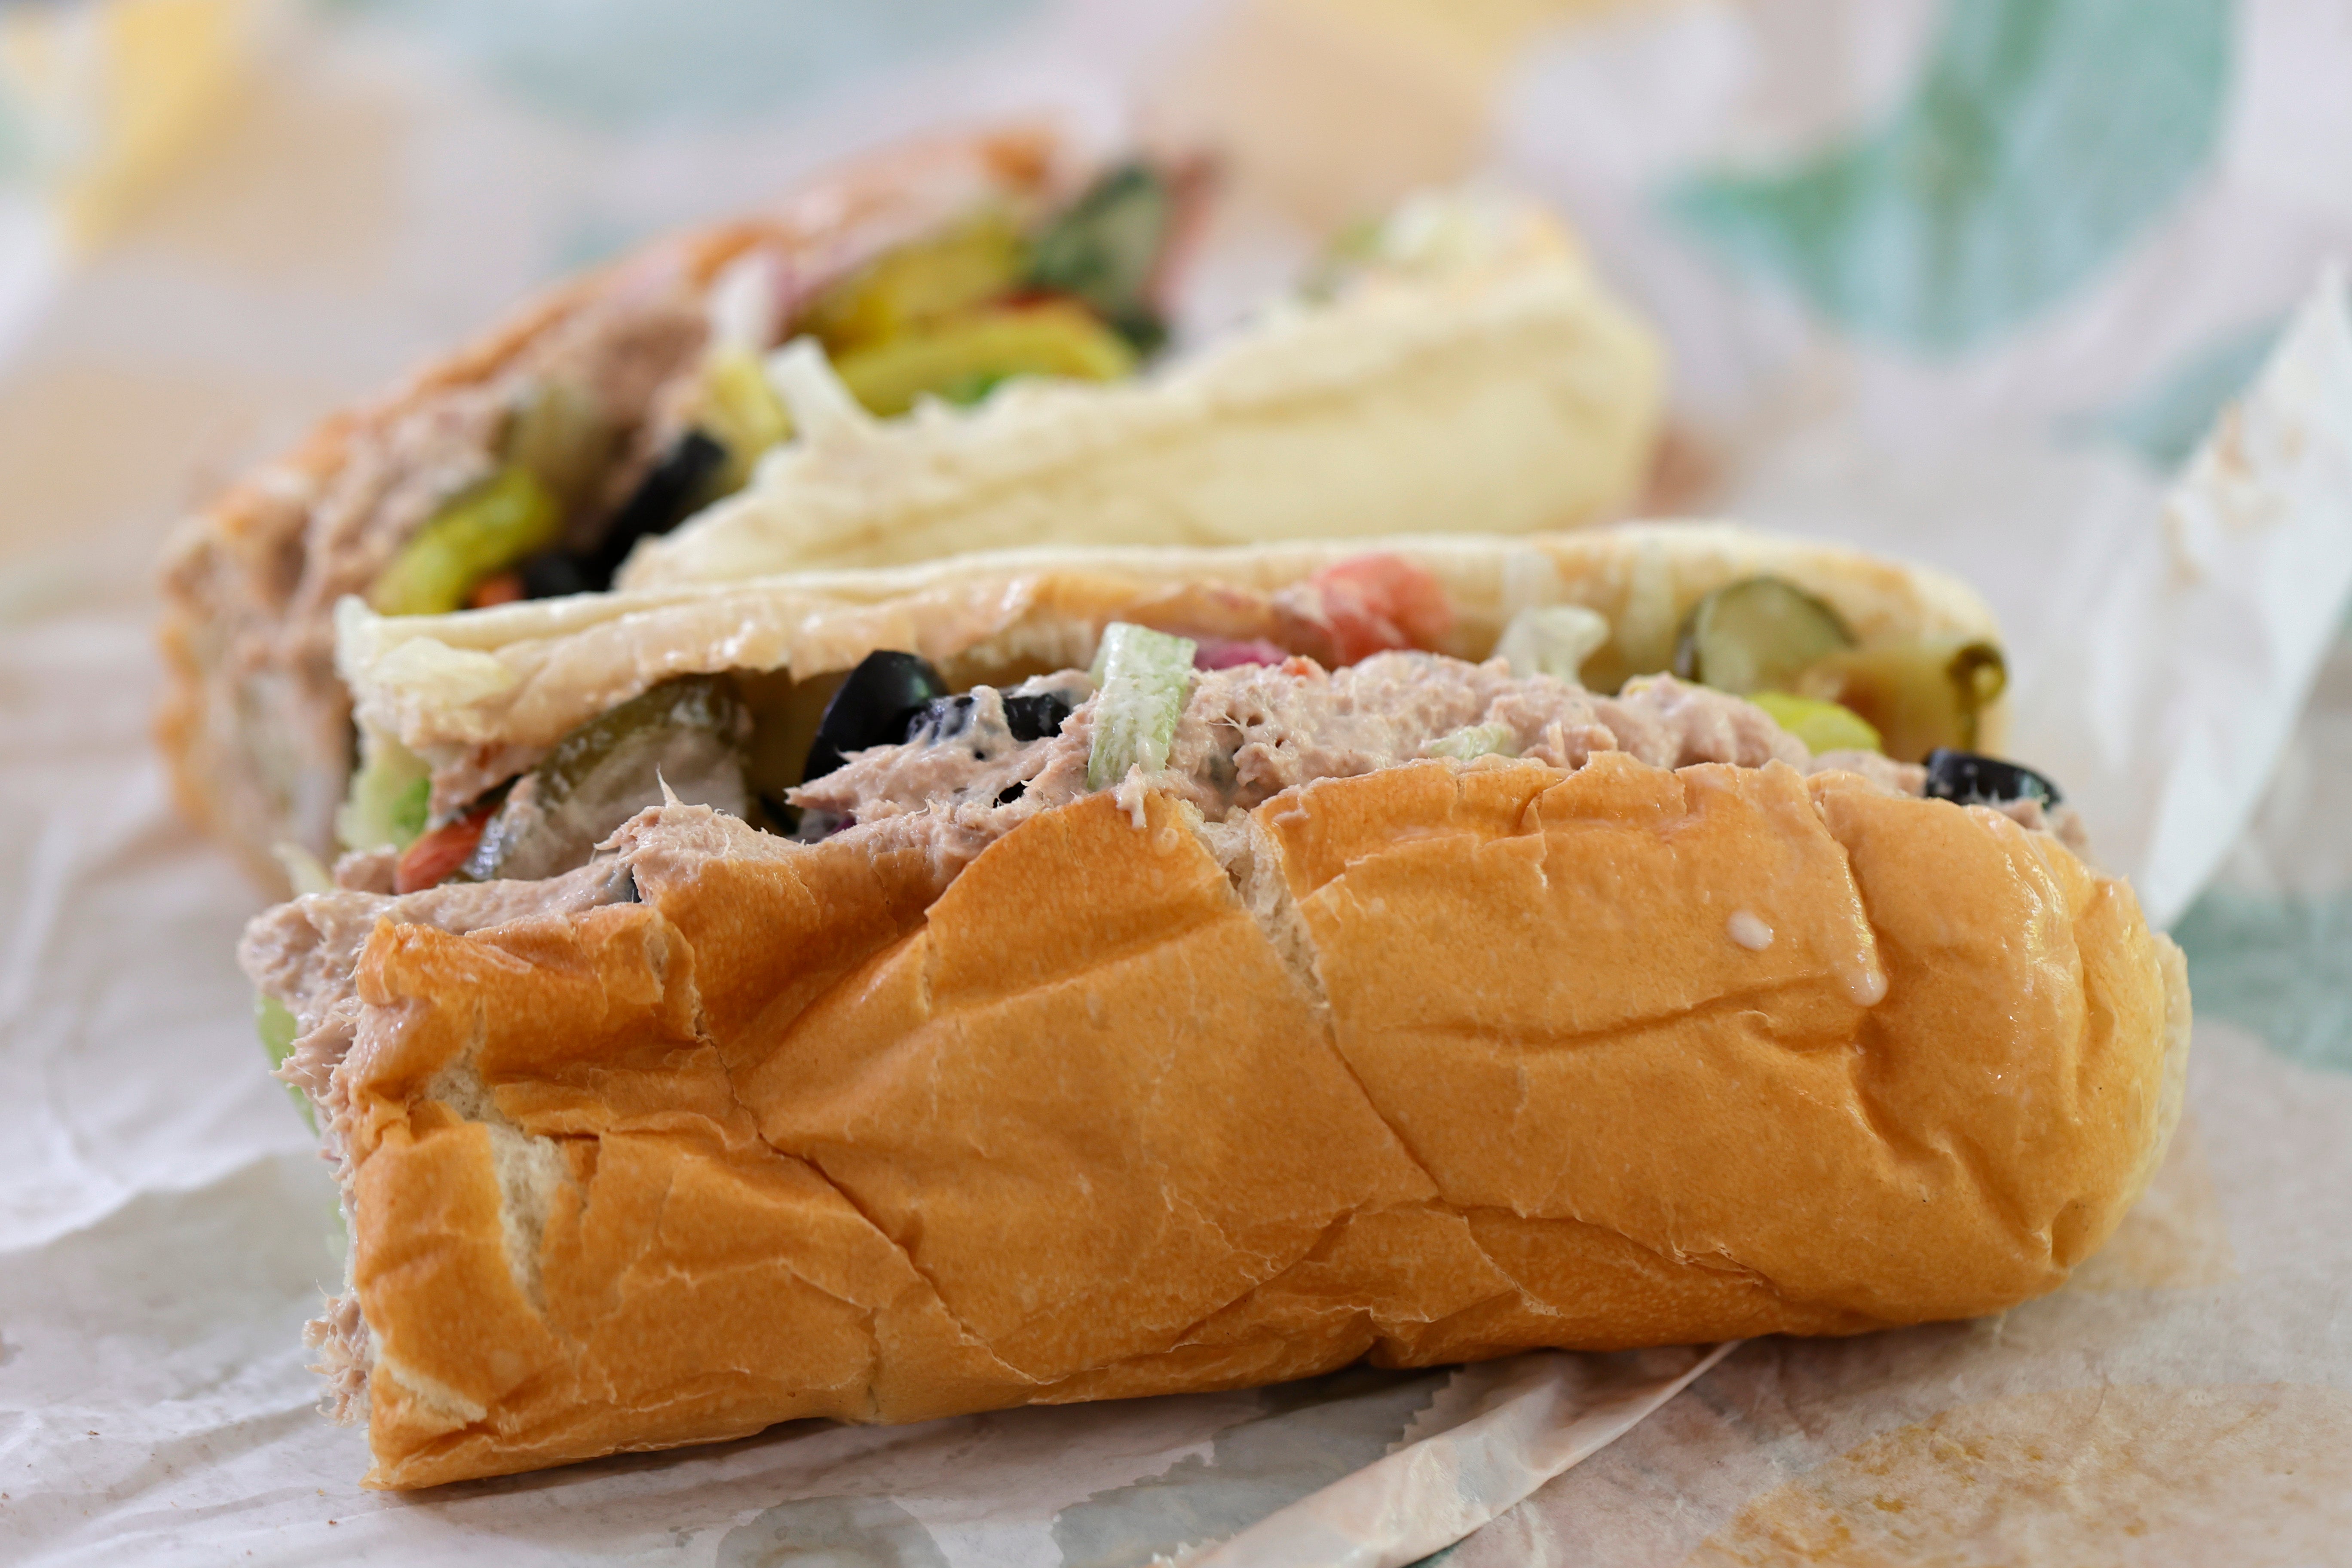 Subway, the chain that became known for it’s ‘$5 footlong,’ is hardly that anymore. Thanks to rising prices, that idea is gone.